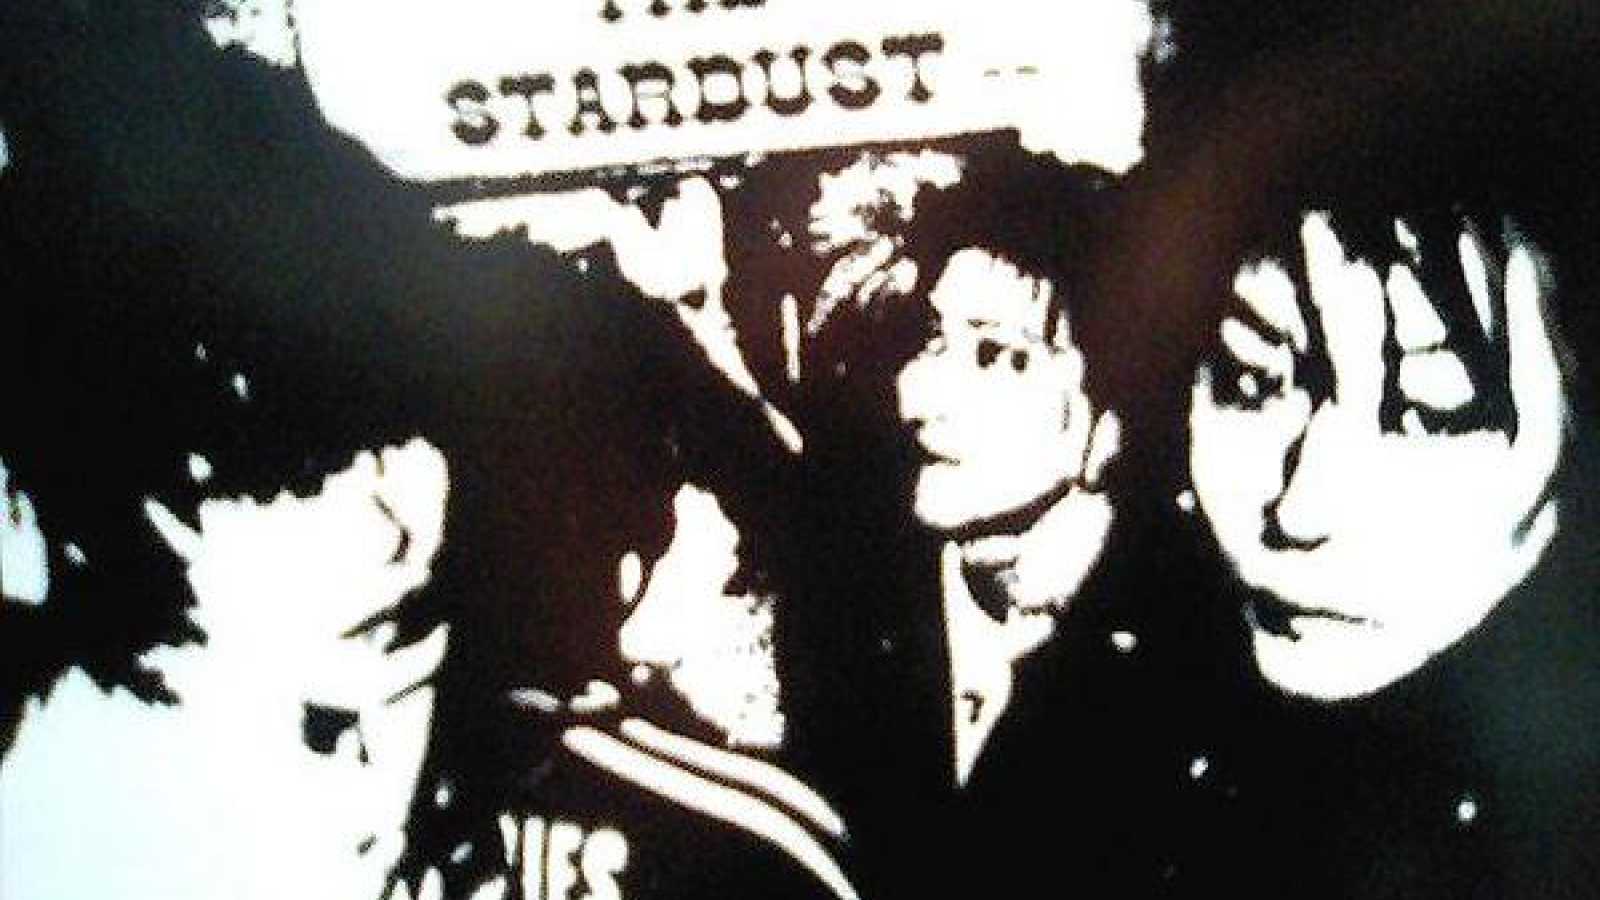 BEYOND THE STARDUST © 